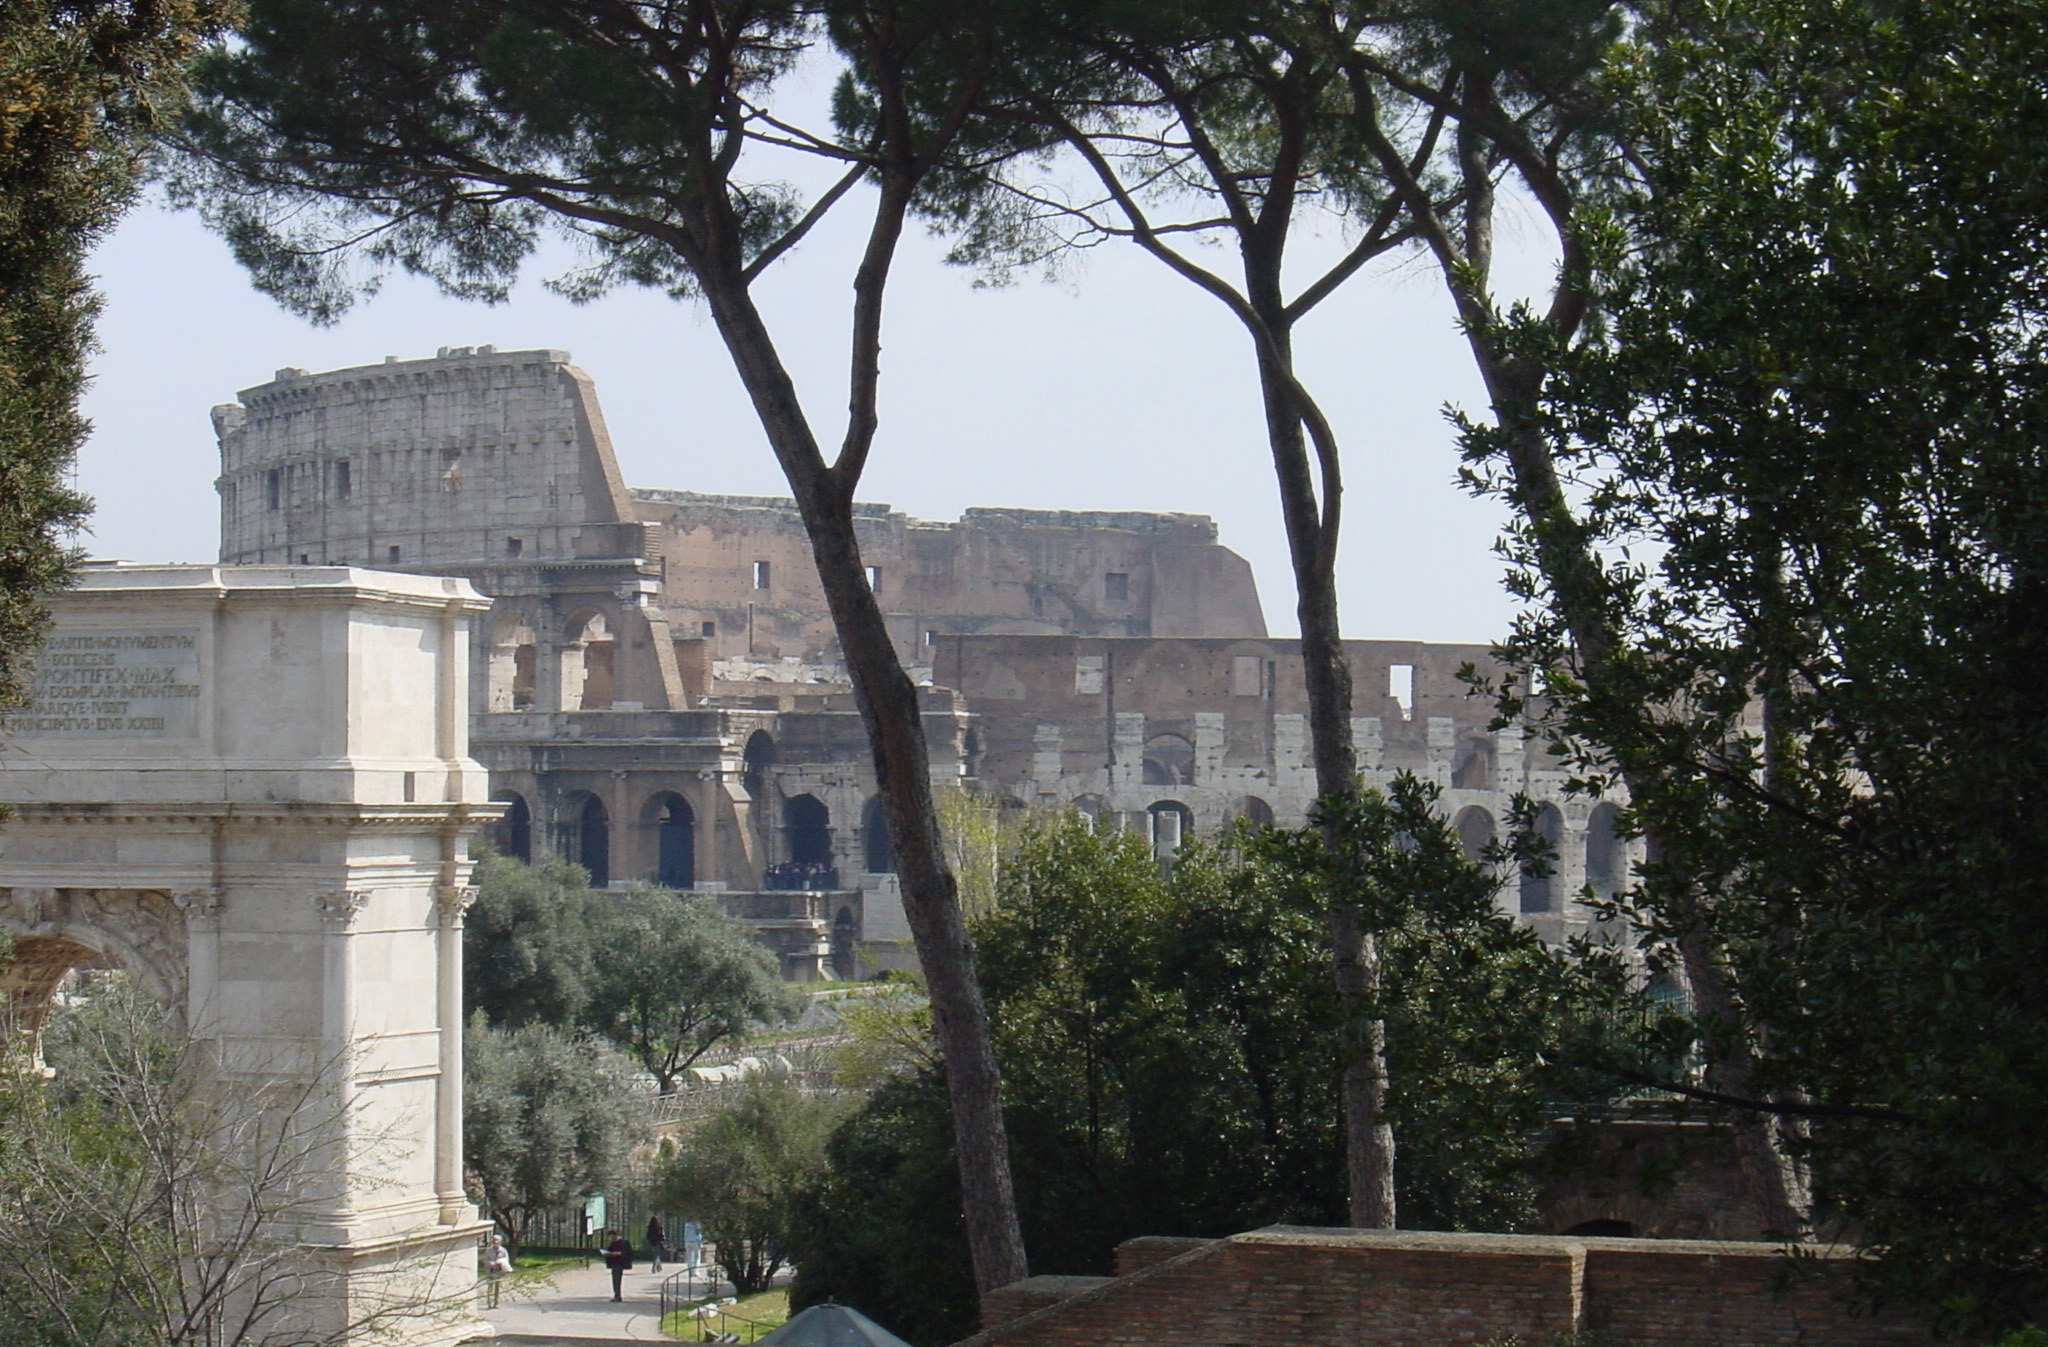 Image of the Colosseum with Arch of Titus in foreground